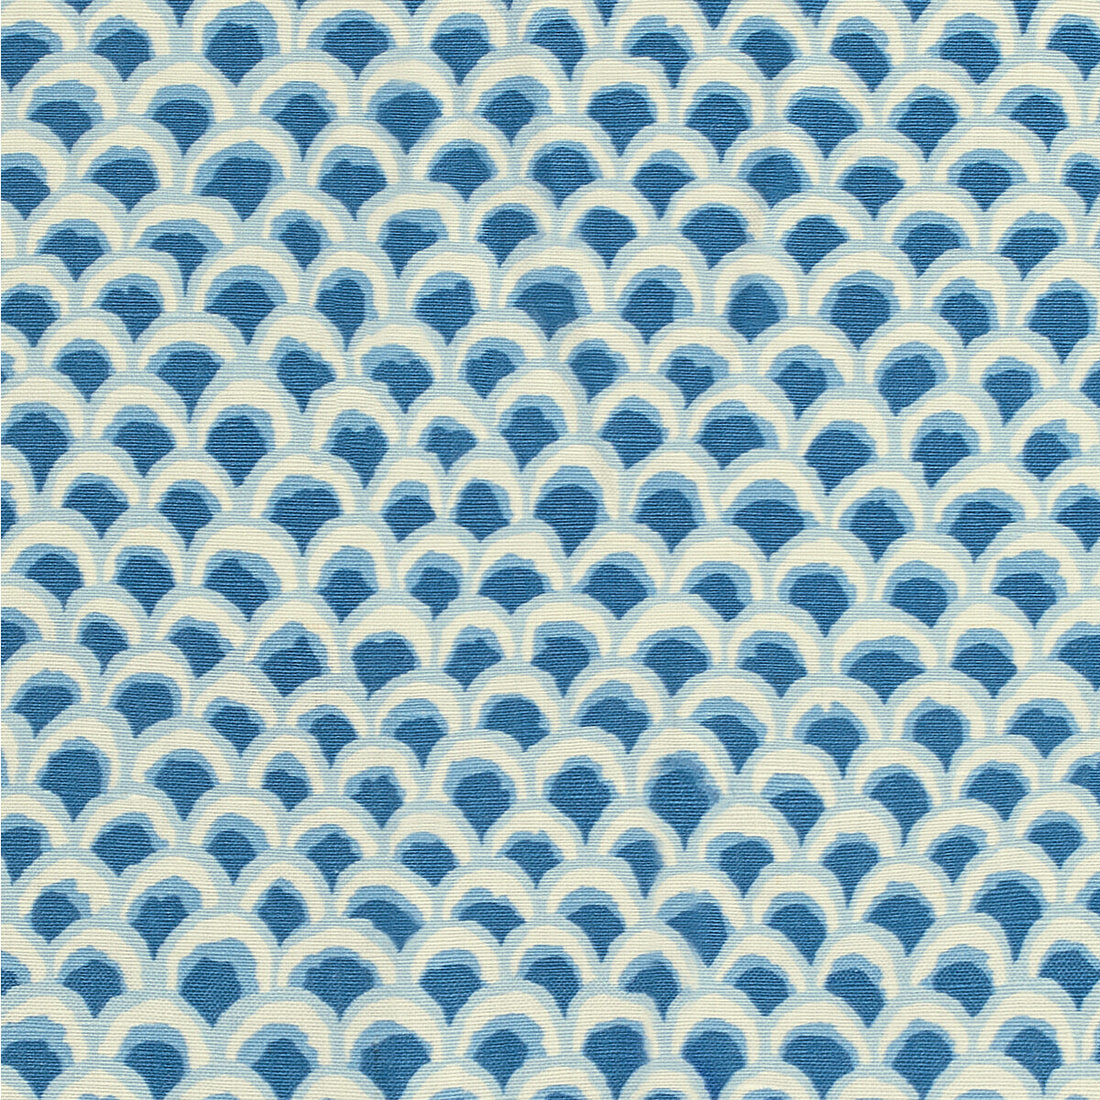 Pave II Print fabric in blue color - pattern 8020126.5.0 - by Brunschwig &amp; Fils in the Louverne collection